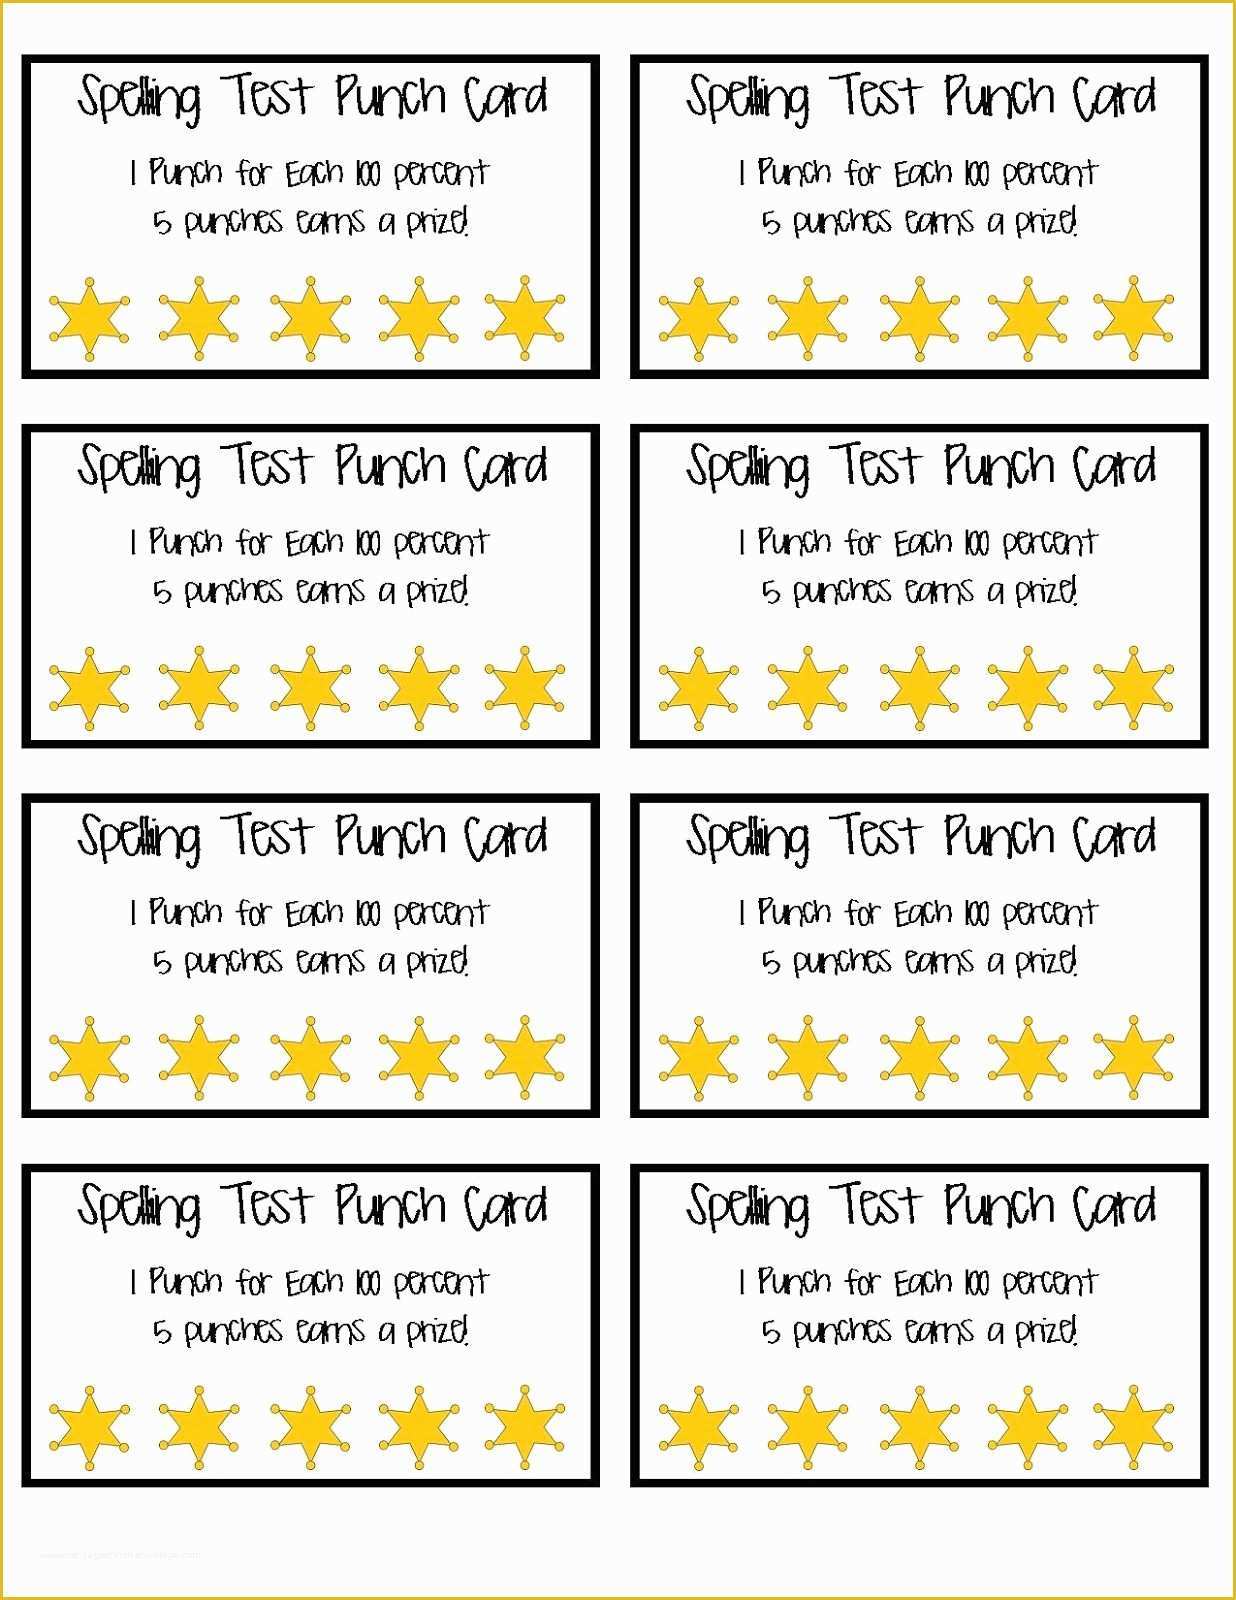 Free Printable Punch Card Template Of Spelling Test Punch Cards Part Of